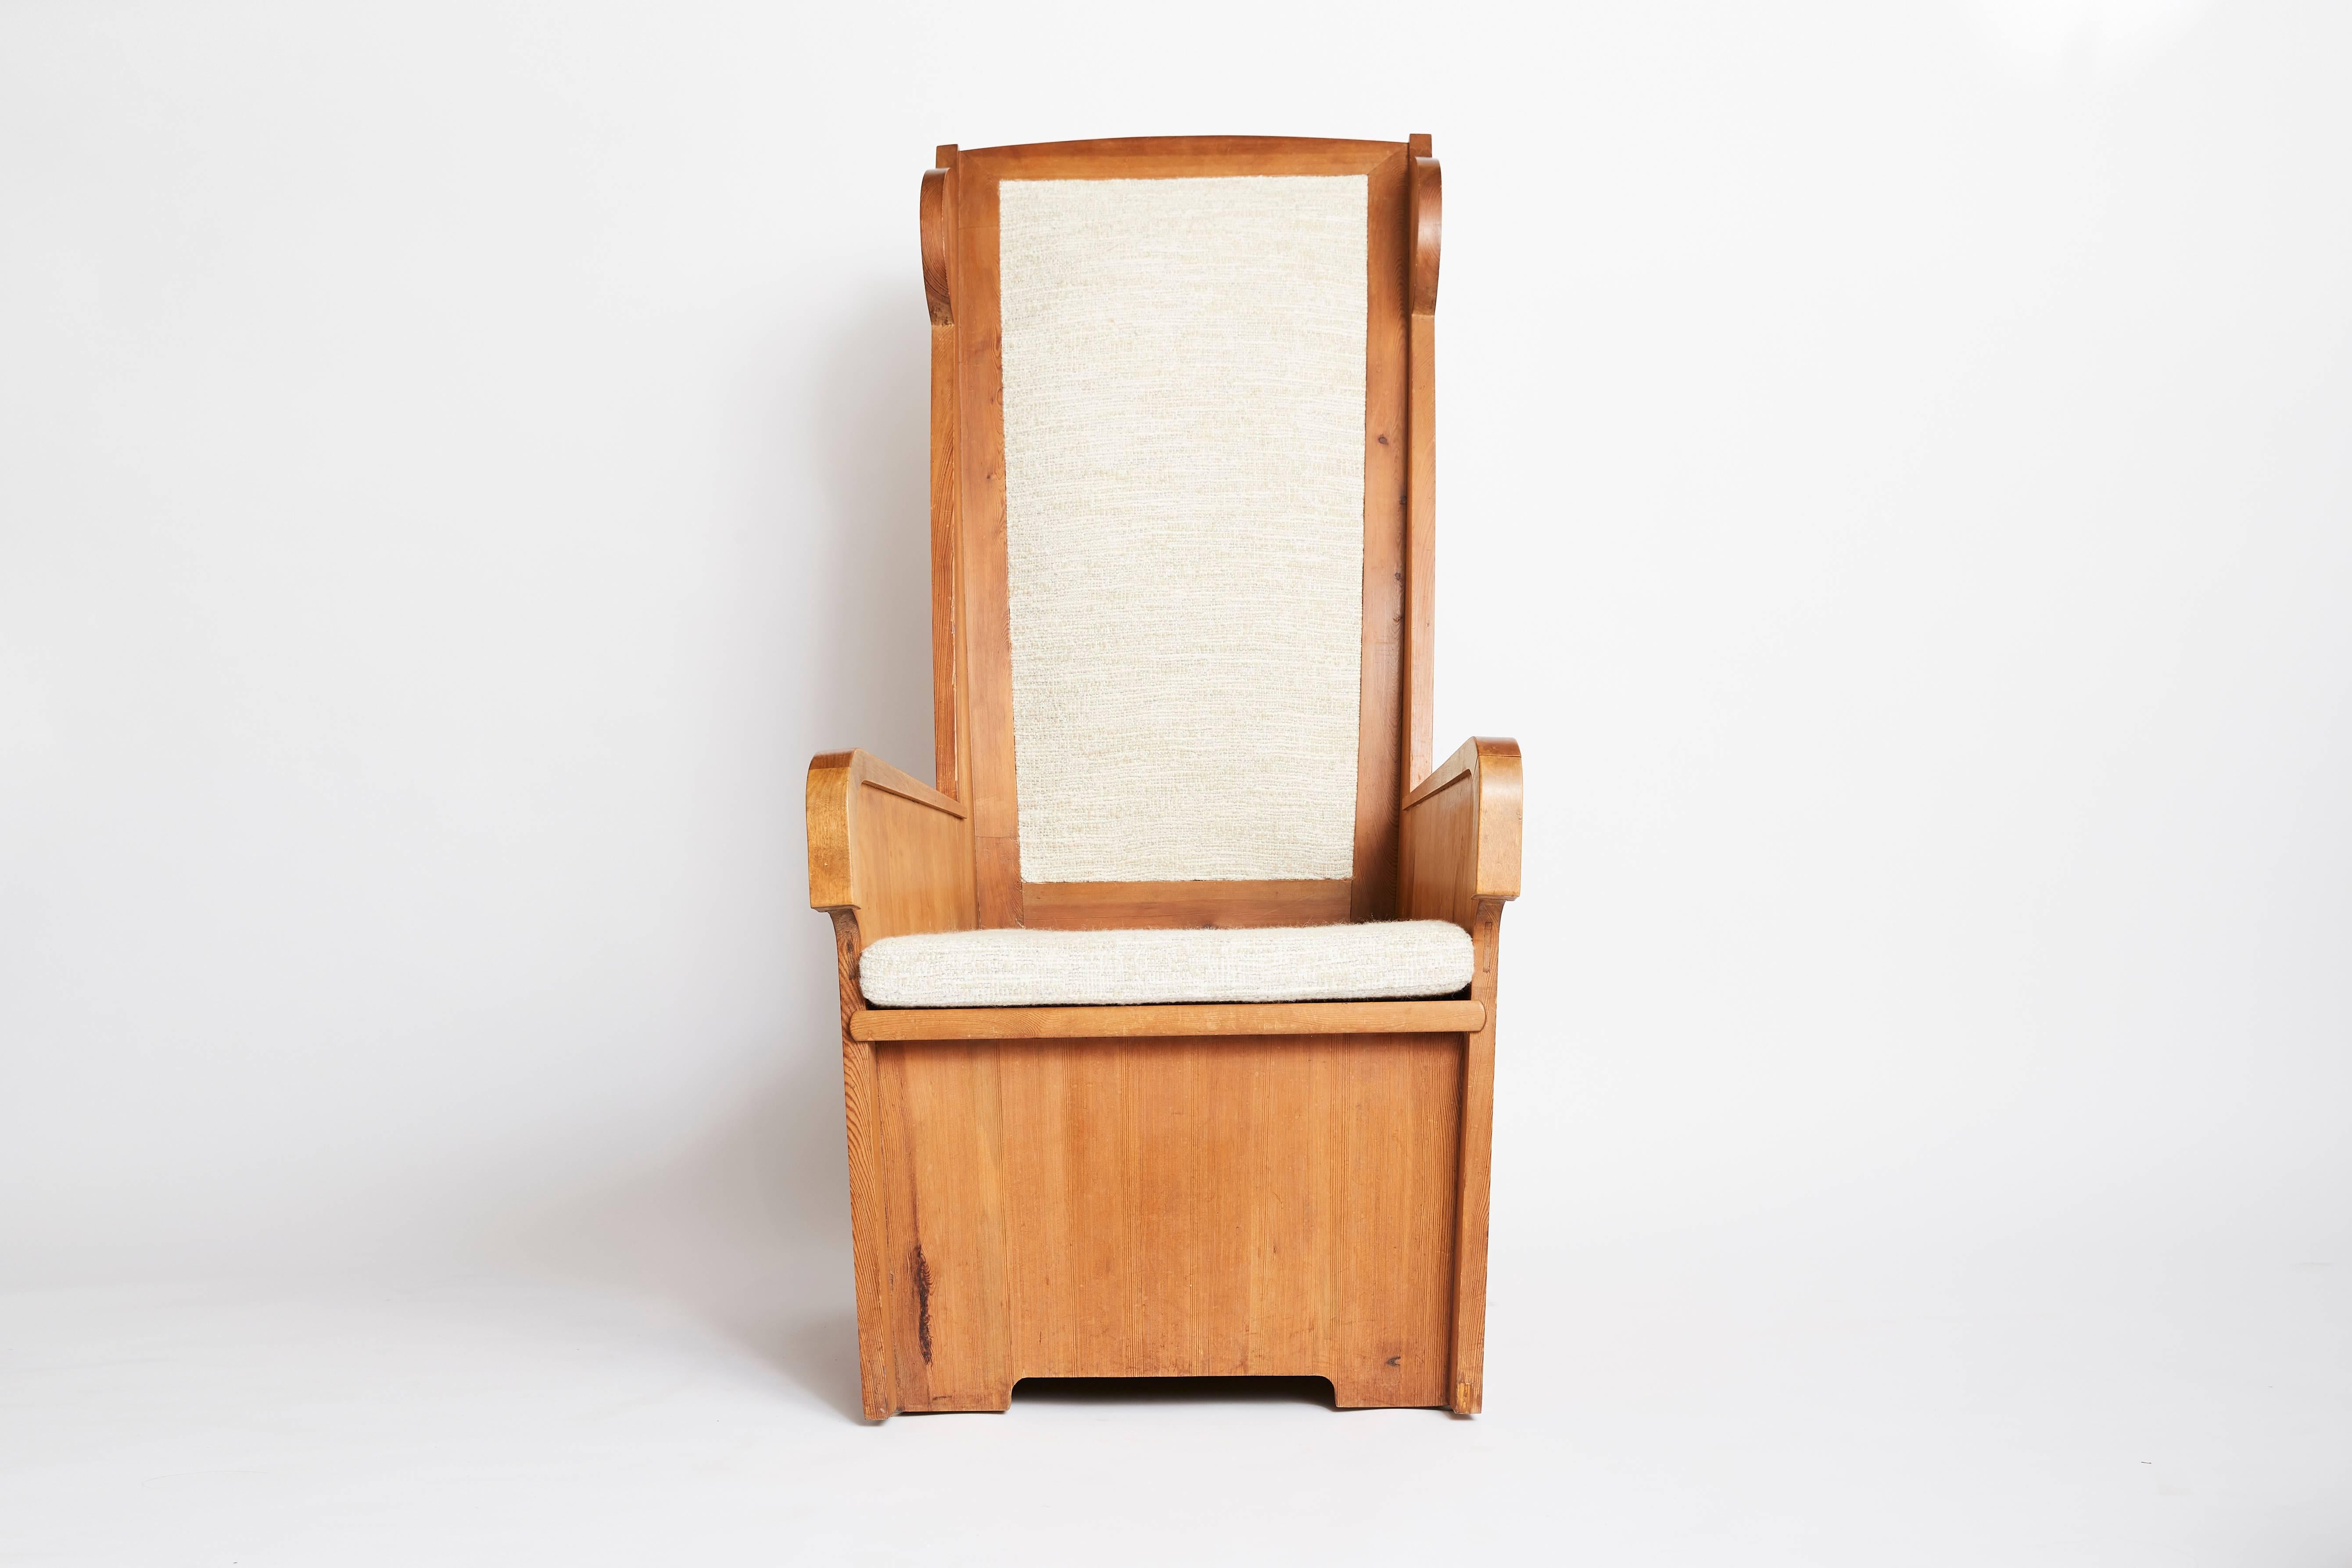 High winged-back pinewood armchair.
Swedish work by designer David Blomberg (1864-1962), dated from 1940s.